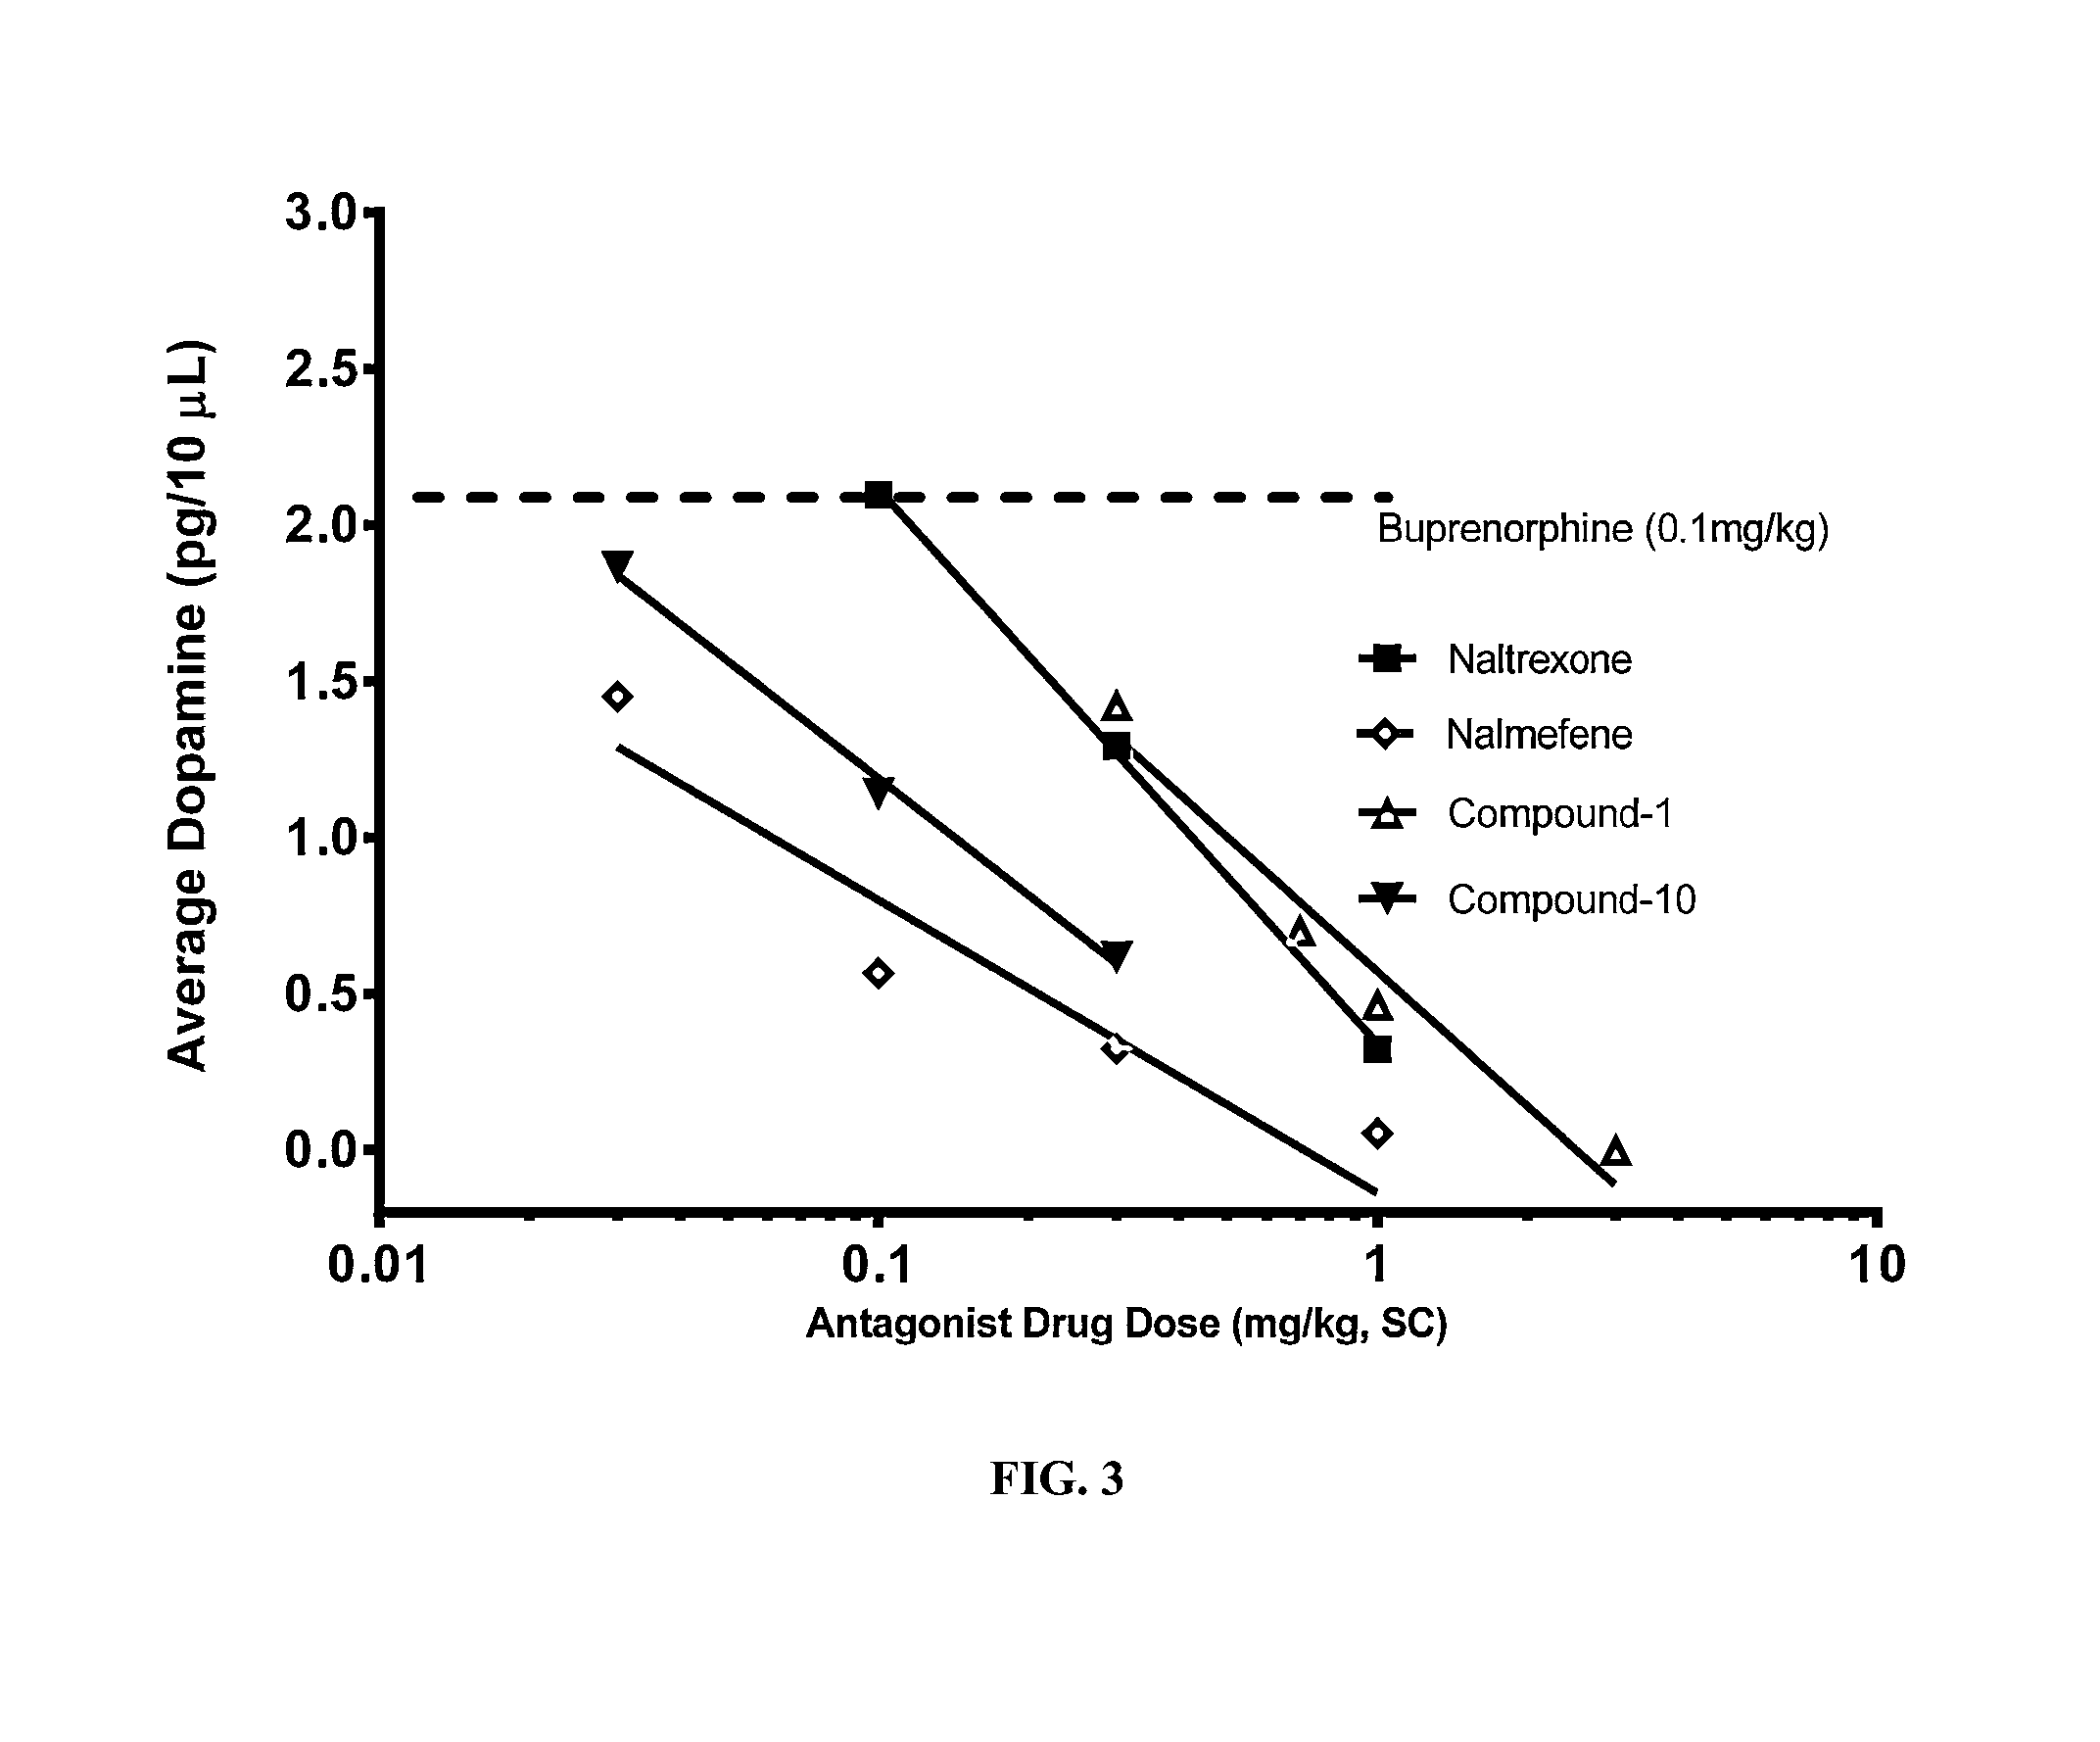 Compositions of buprenorphine and μ antagonists